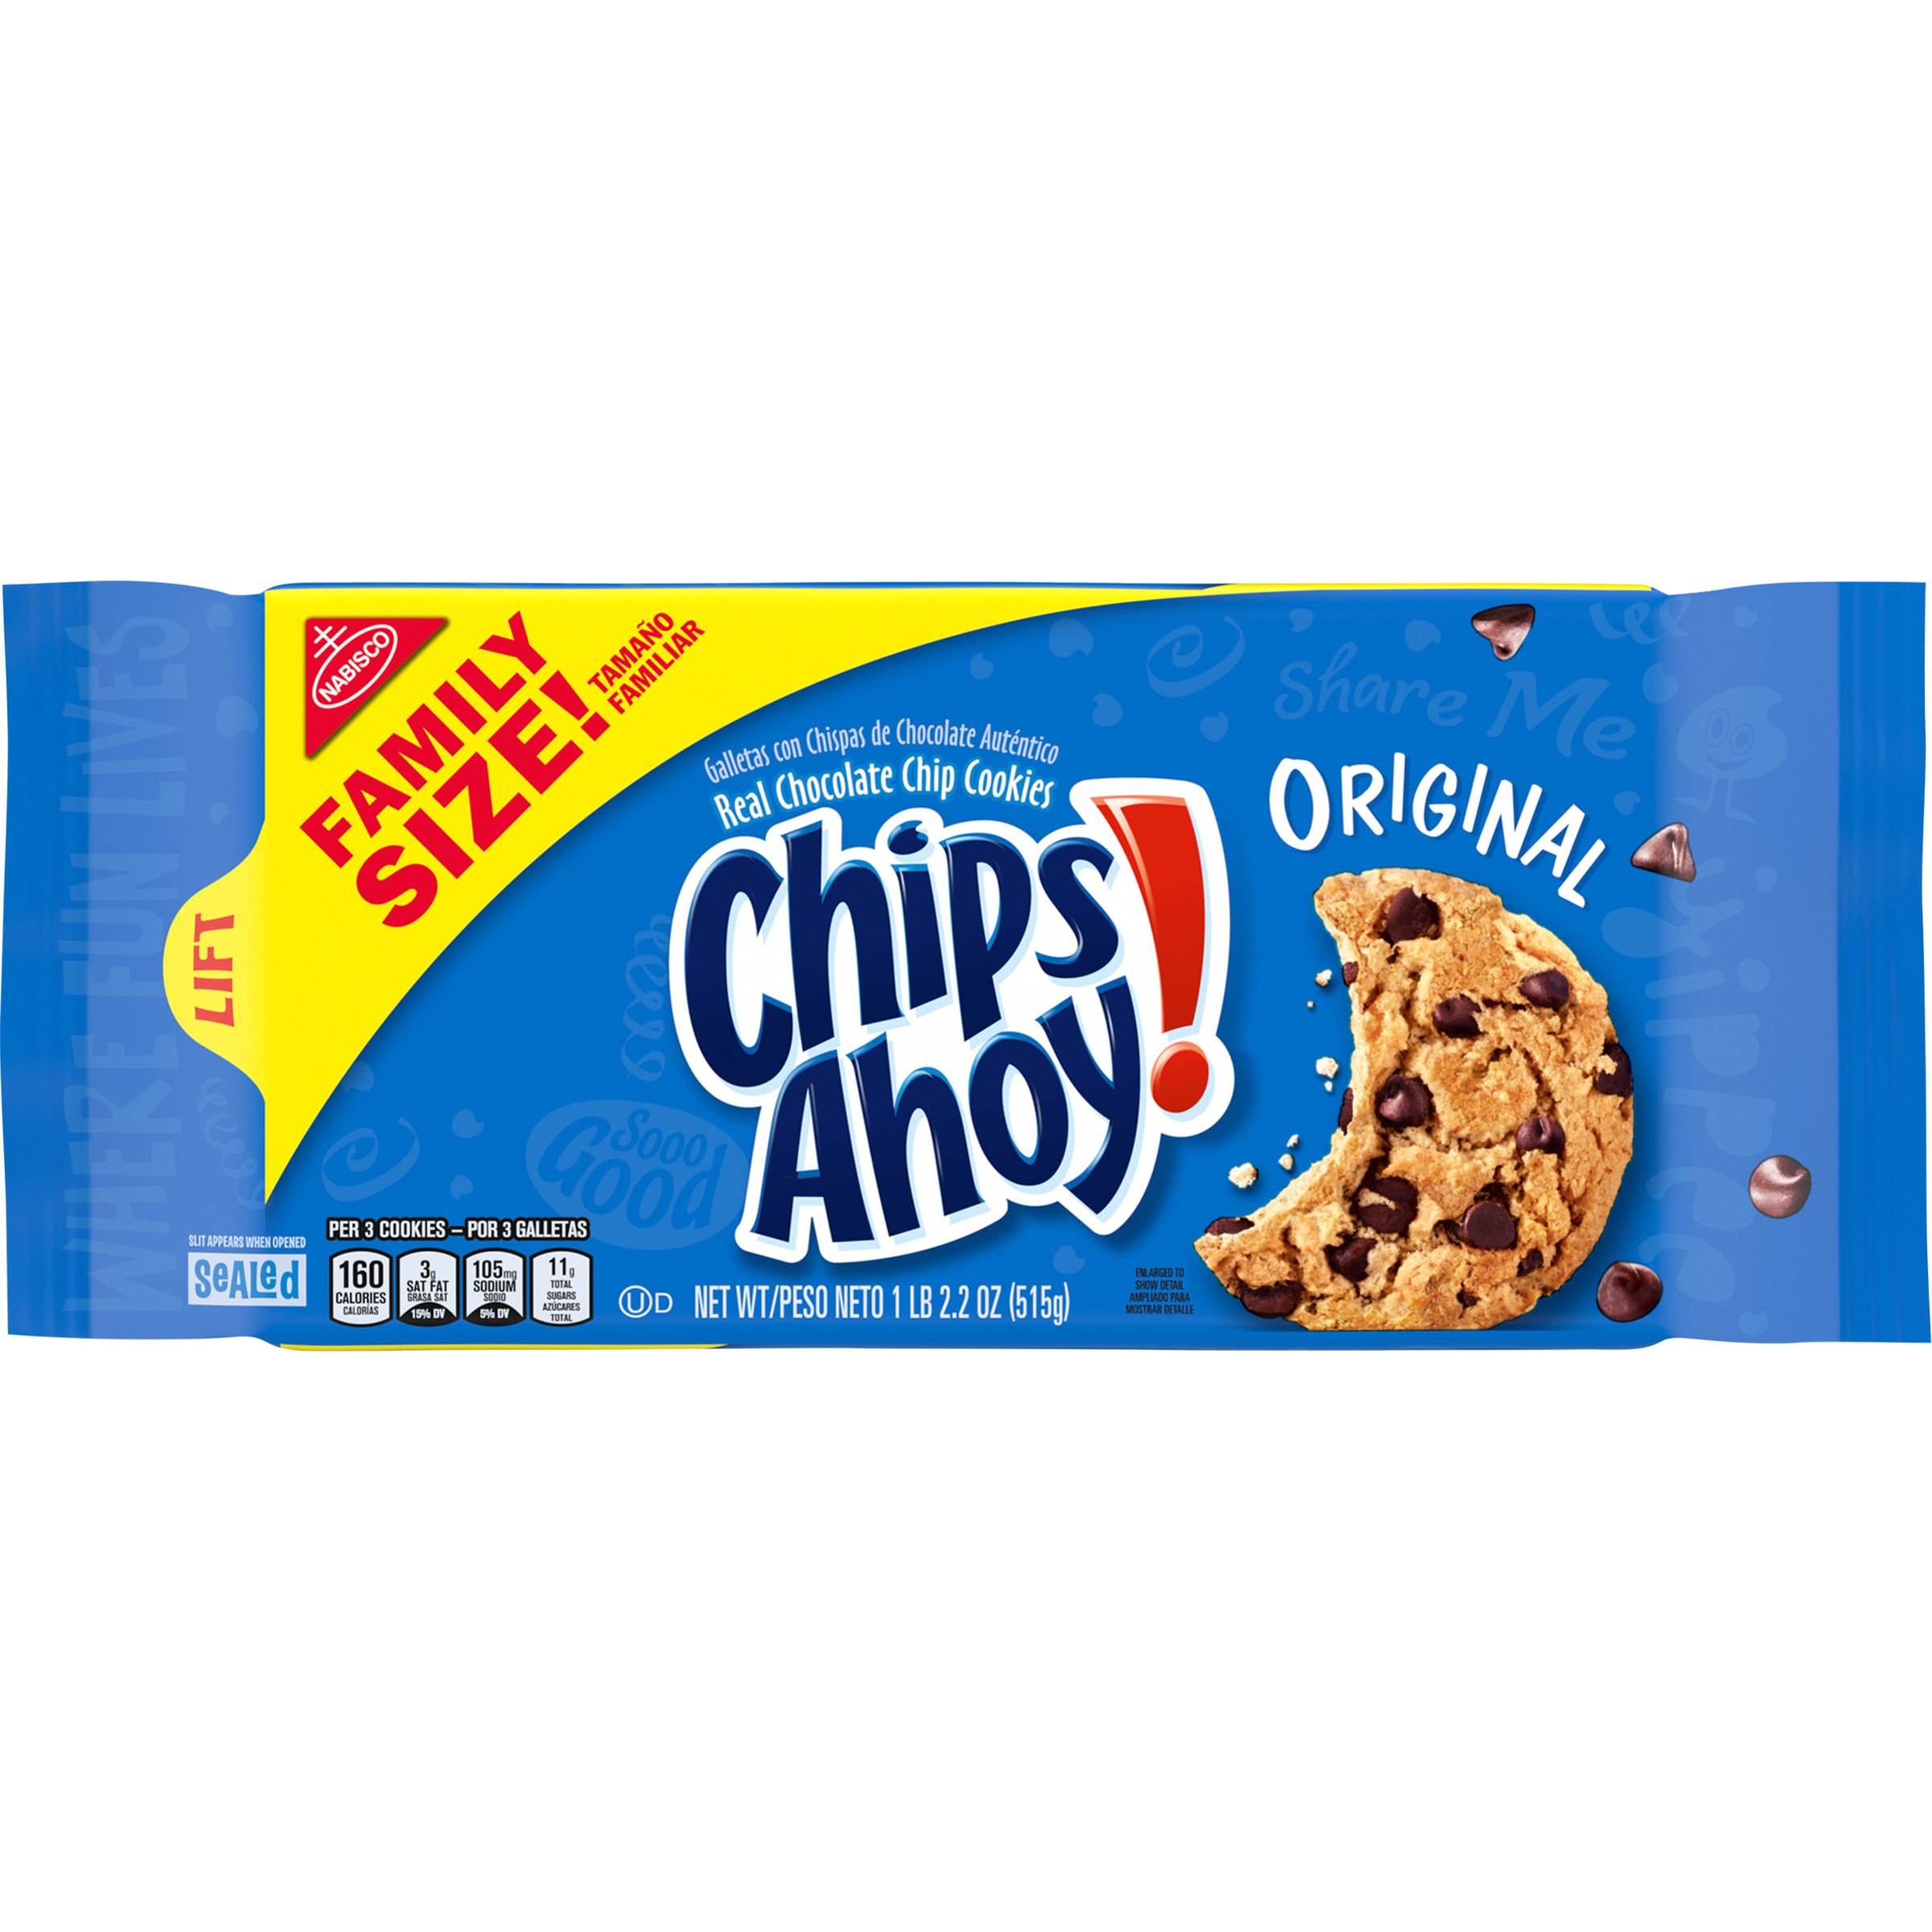 CHIPS AHOY! Original Chocolate Chip Cookies, Family Size, 18.2 oz-1